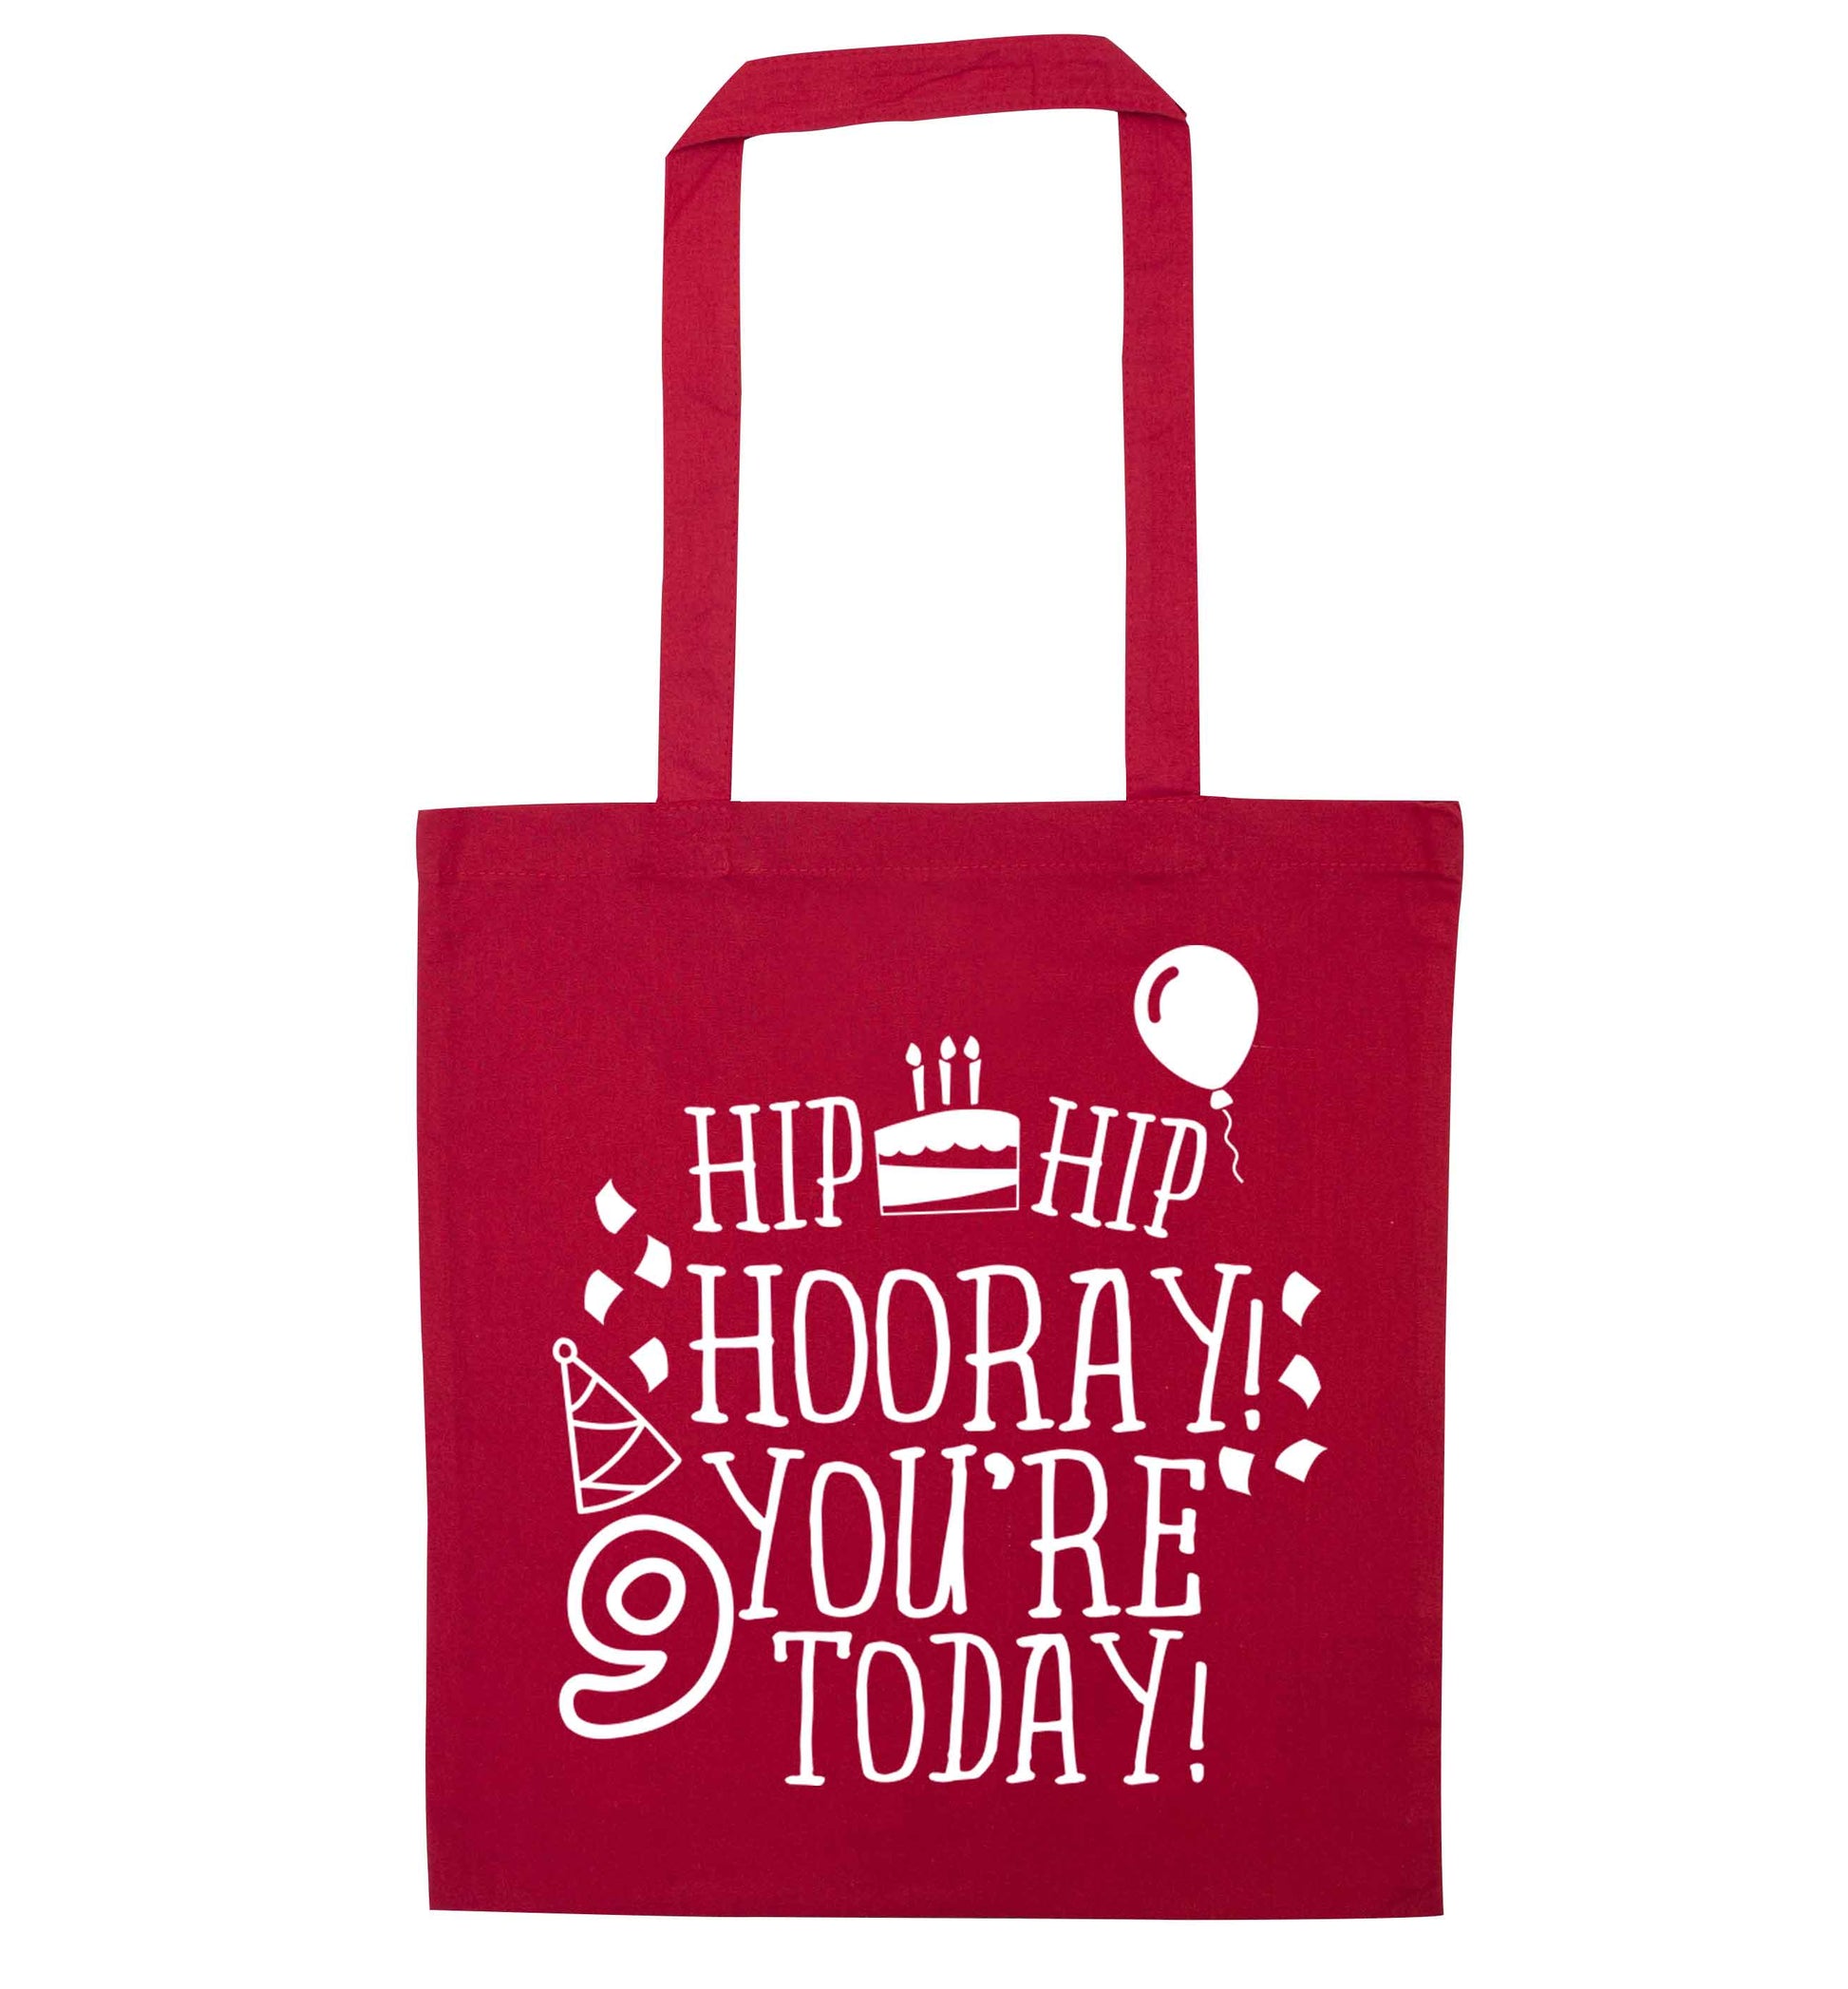 Hip hip hooray you're 9 today! red tote bag